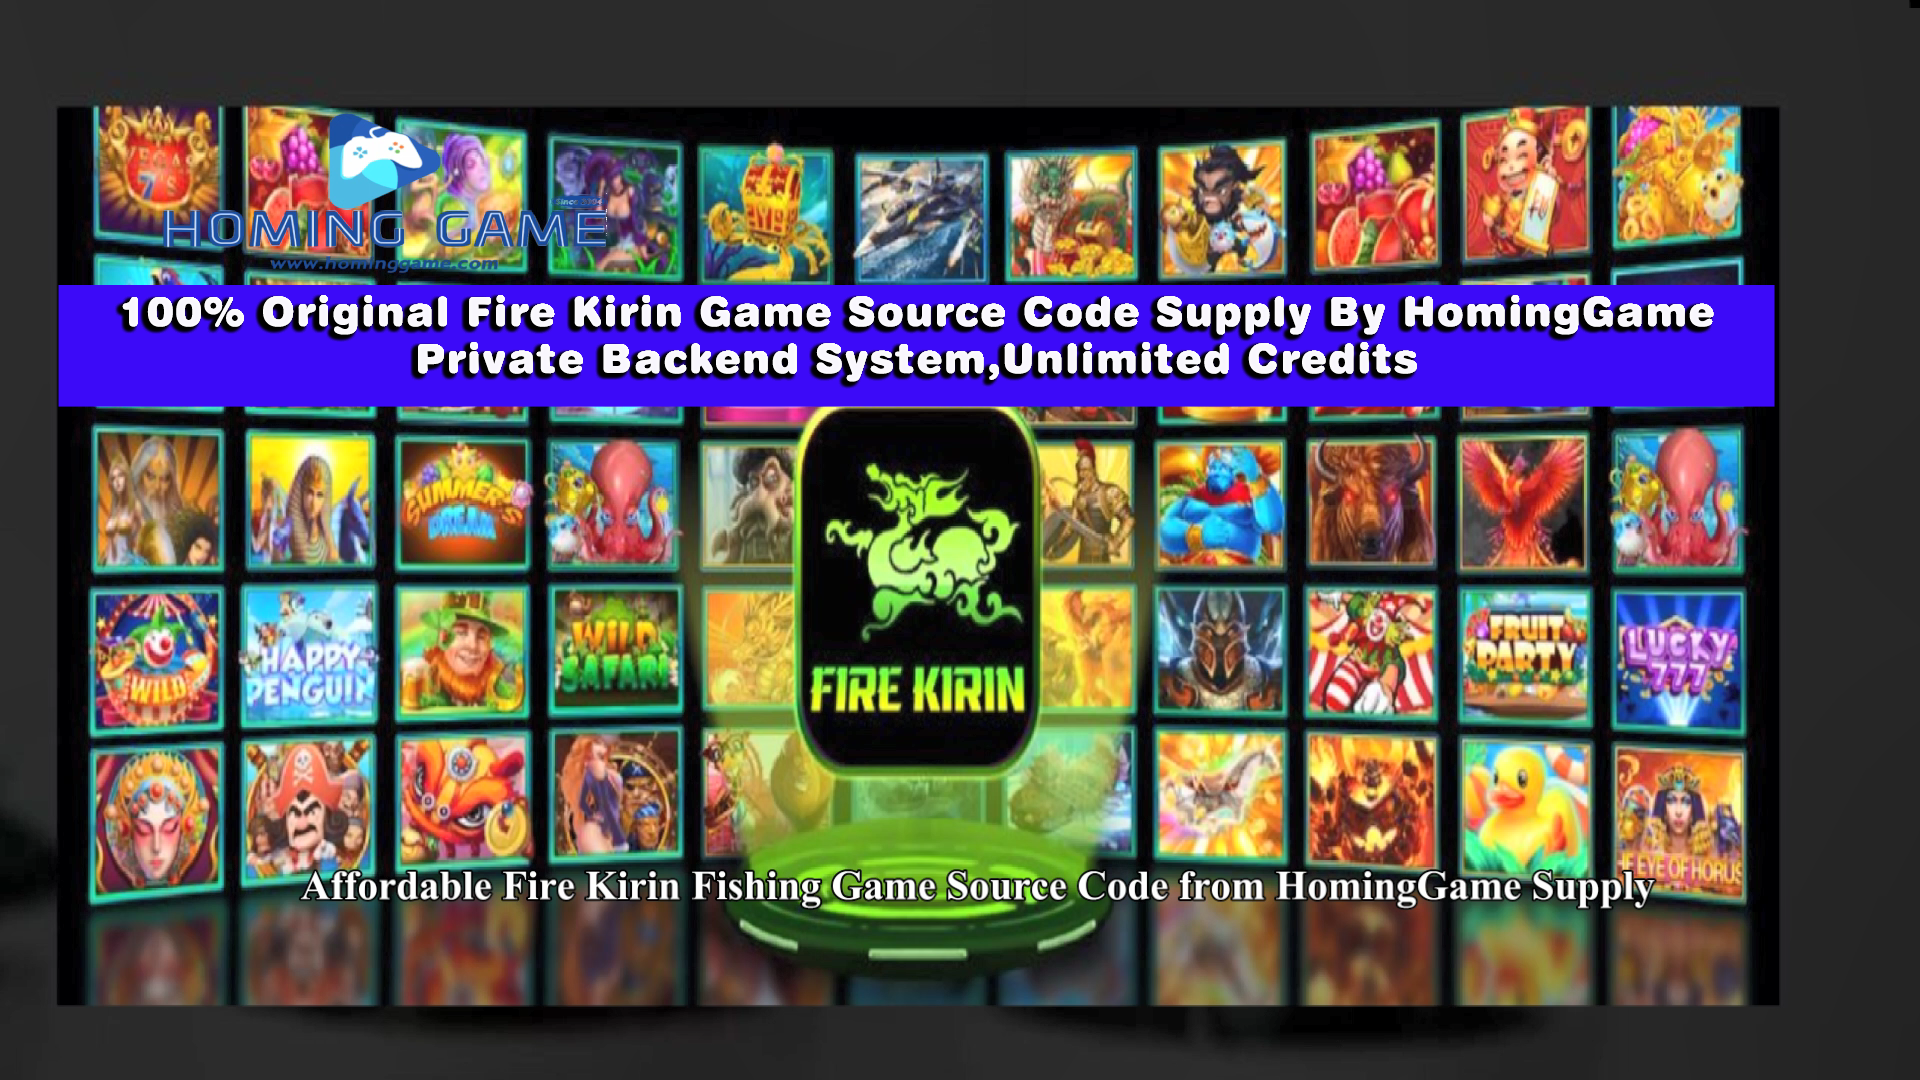 Get Affordable Fire Kirin Fishing Game Source Code from HomingGame Supply!#fire kirin#sweepstakes